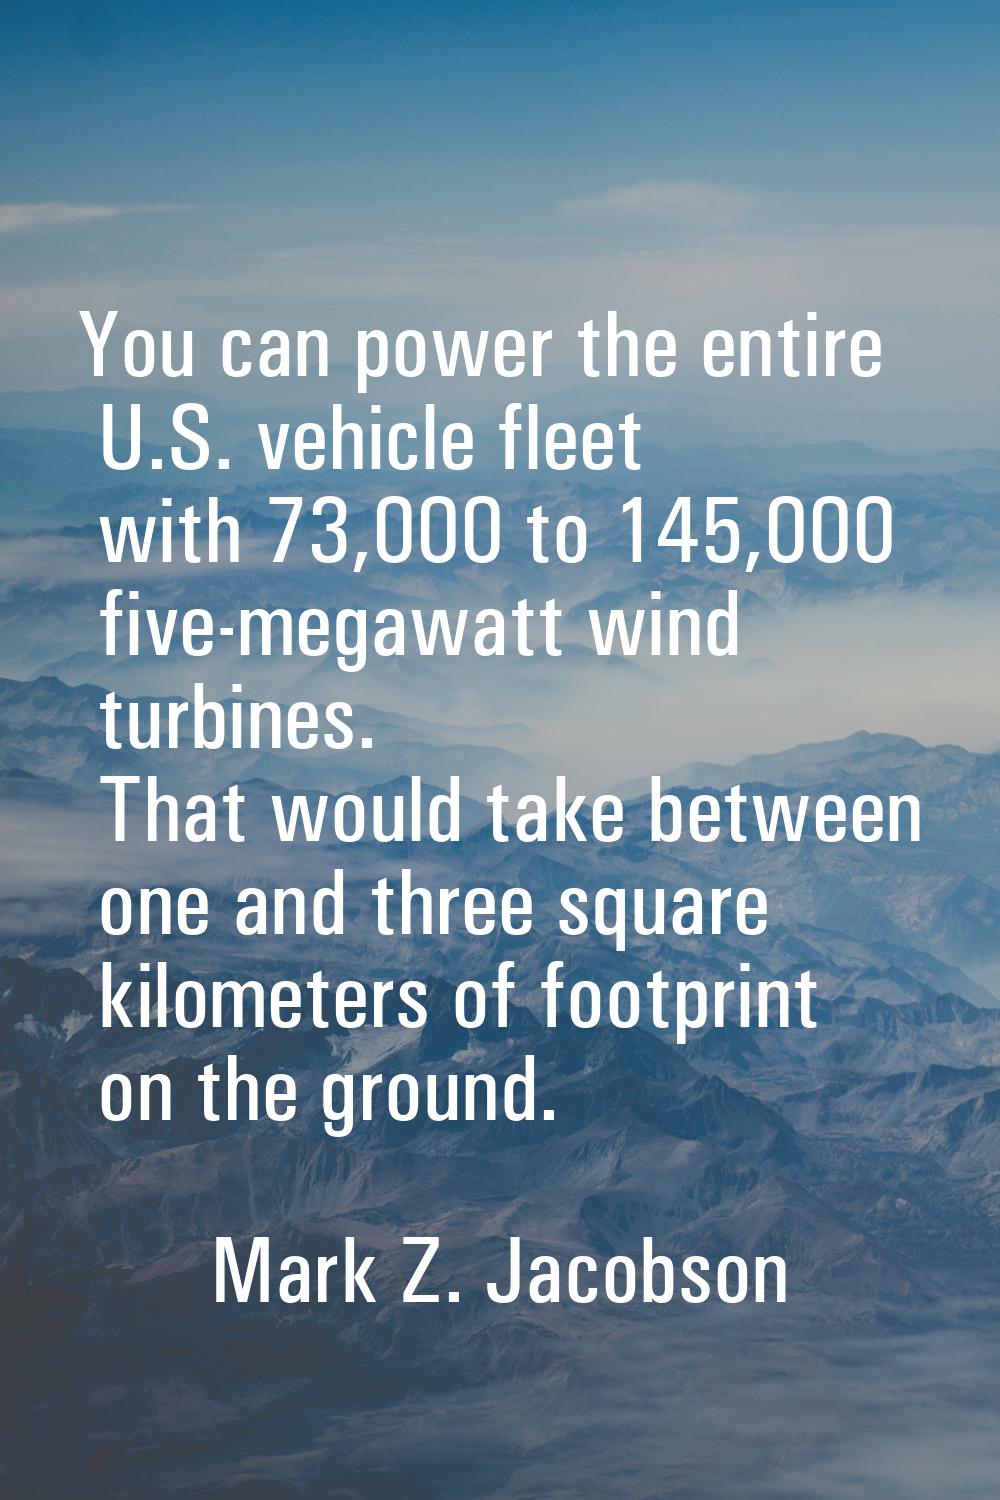 You can power the entire U.S. vehicle fleet with 73,000 to 145,000 five-megawatt wind turbines. Tha